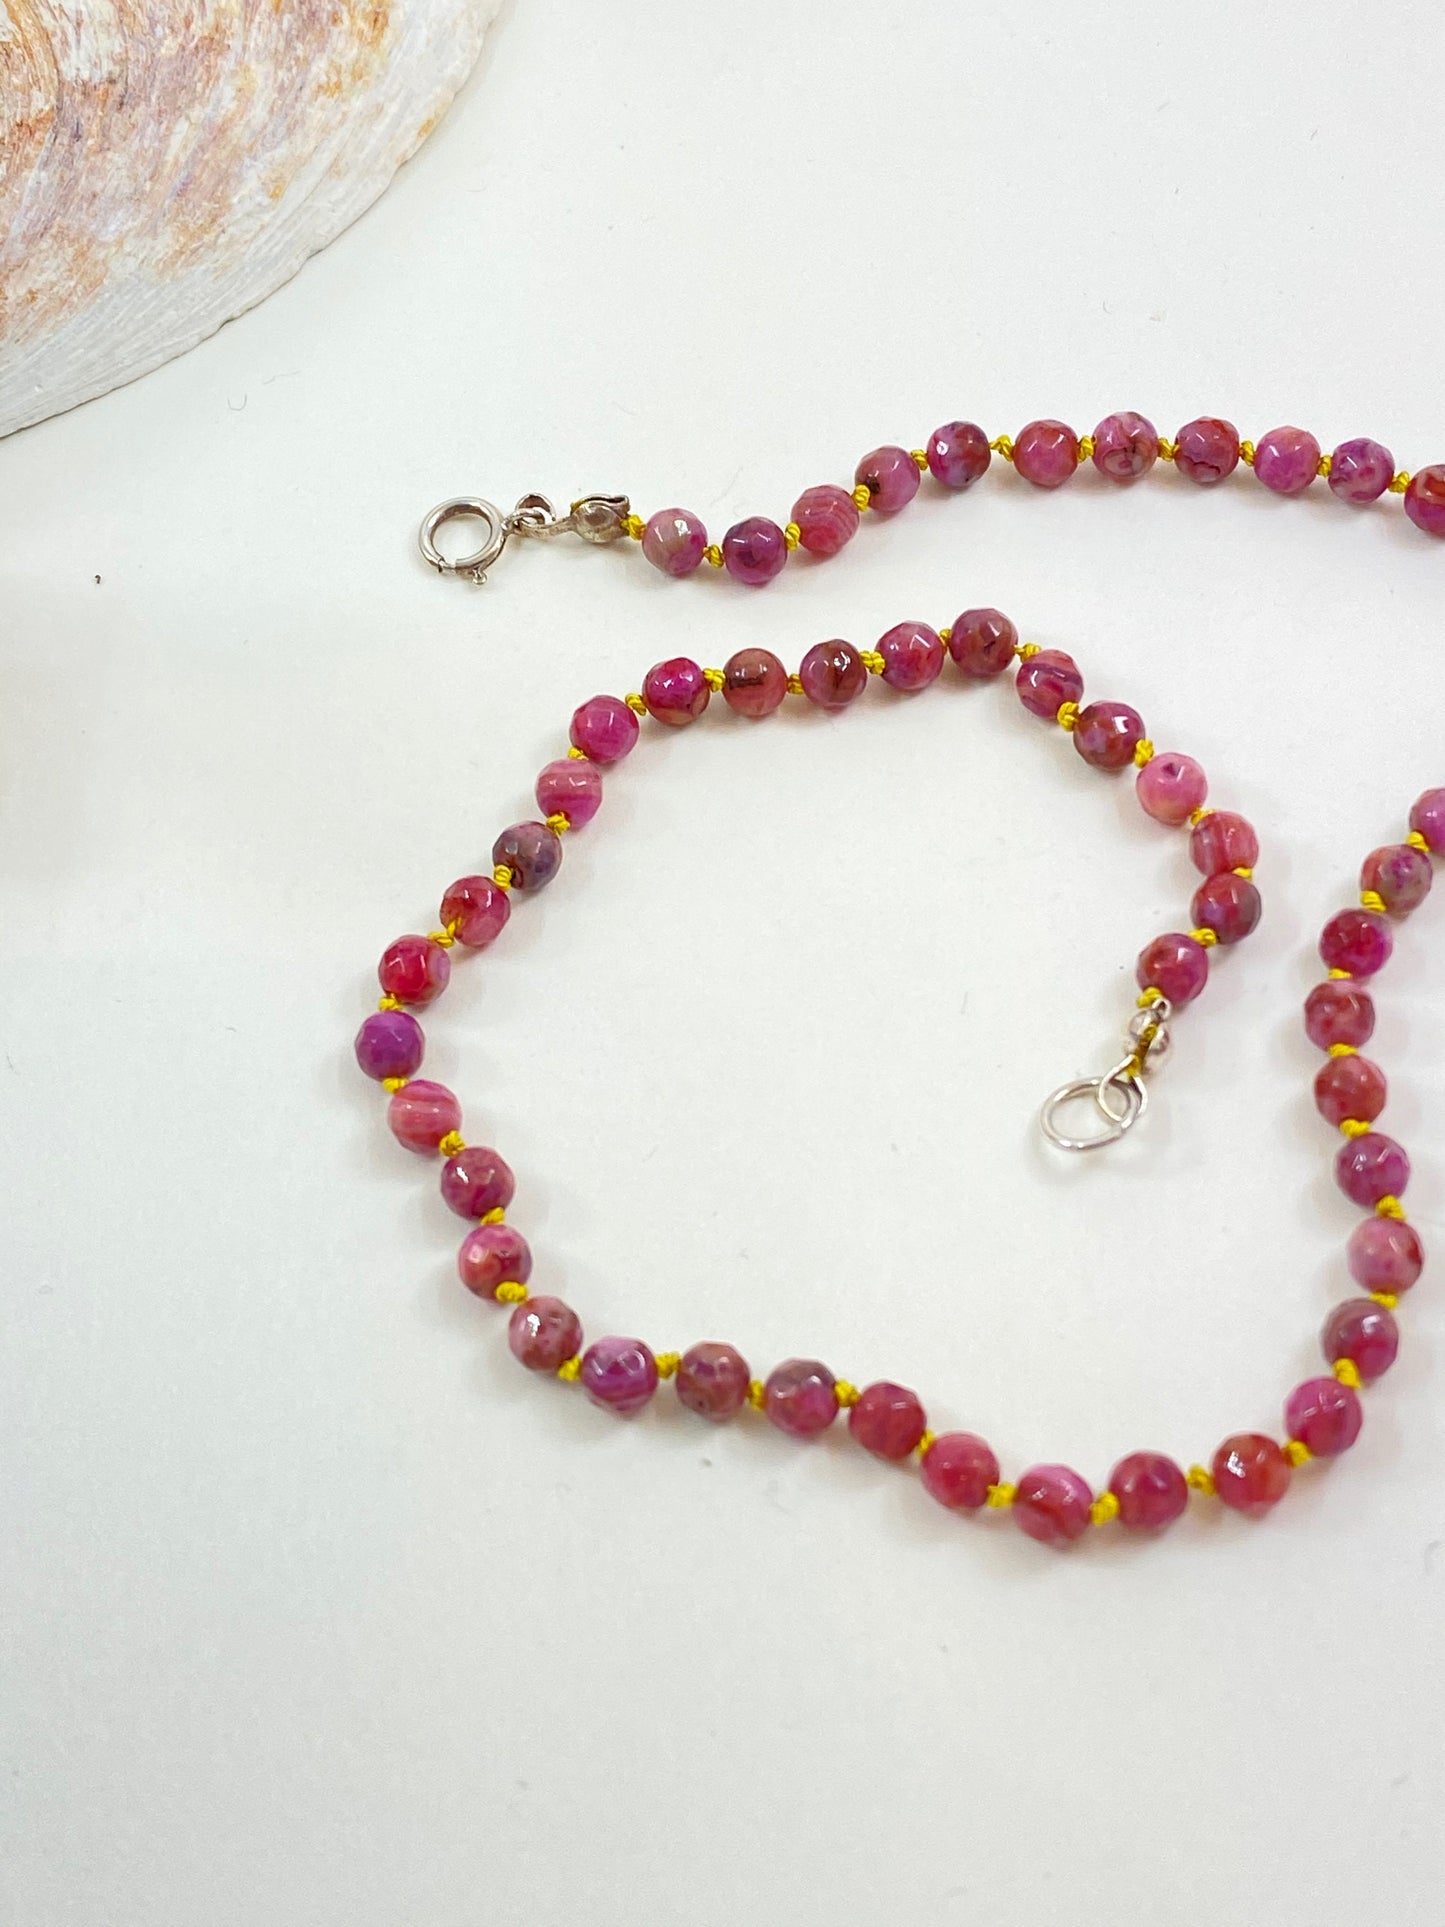 Children's precious rose agate beaded necklace. Knotted safely with silk thread, to be worn in sweetness and joy.